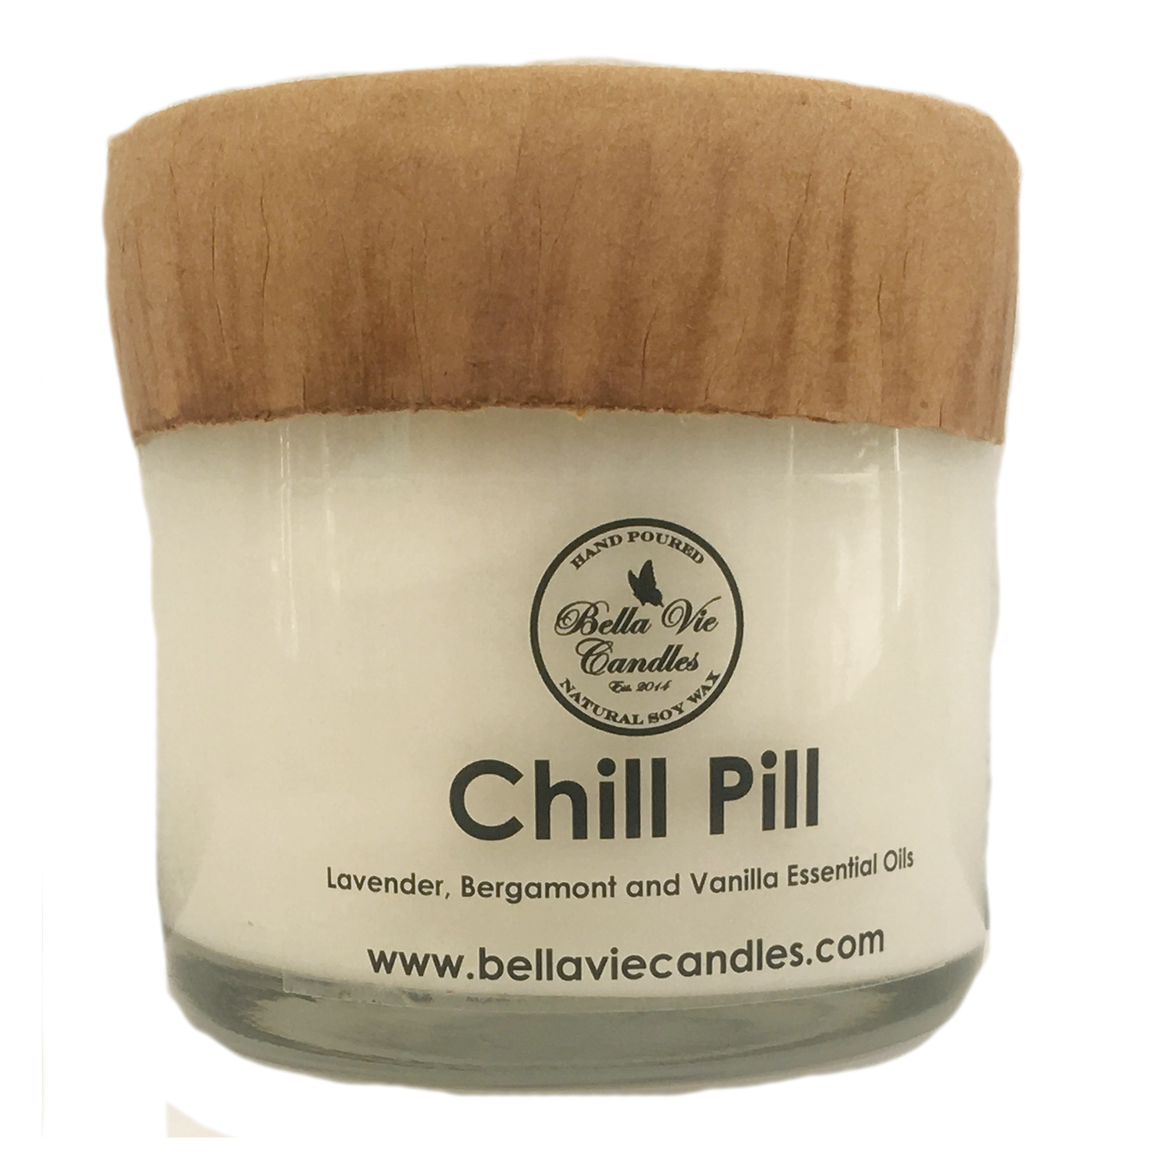 Chill Pill Original Scented Essential Oil Soy Candle